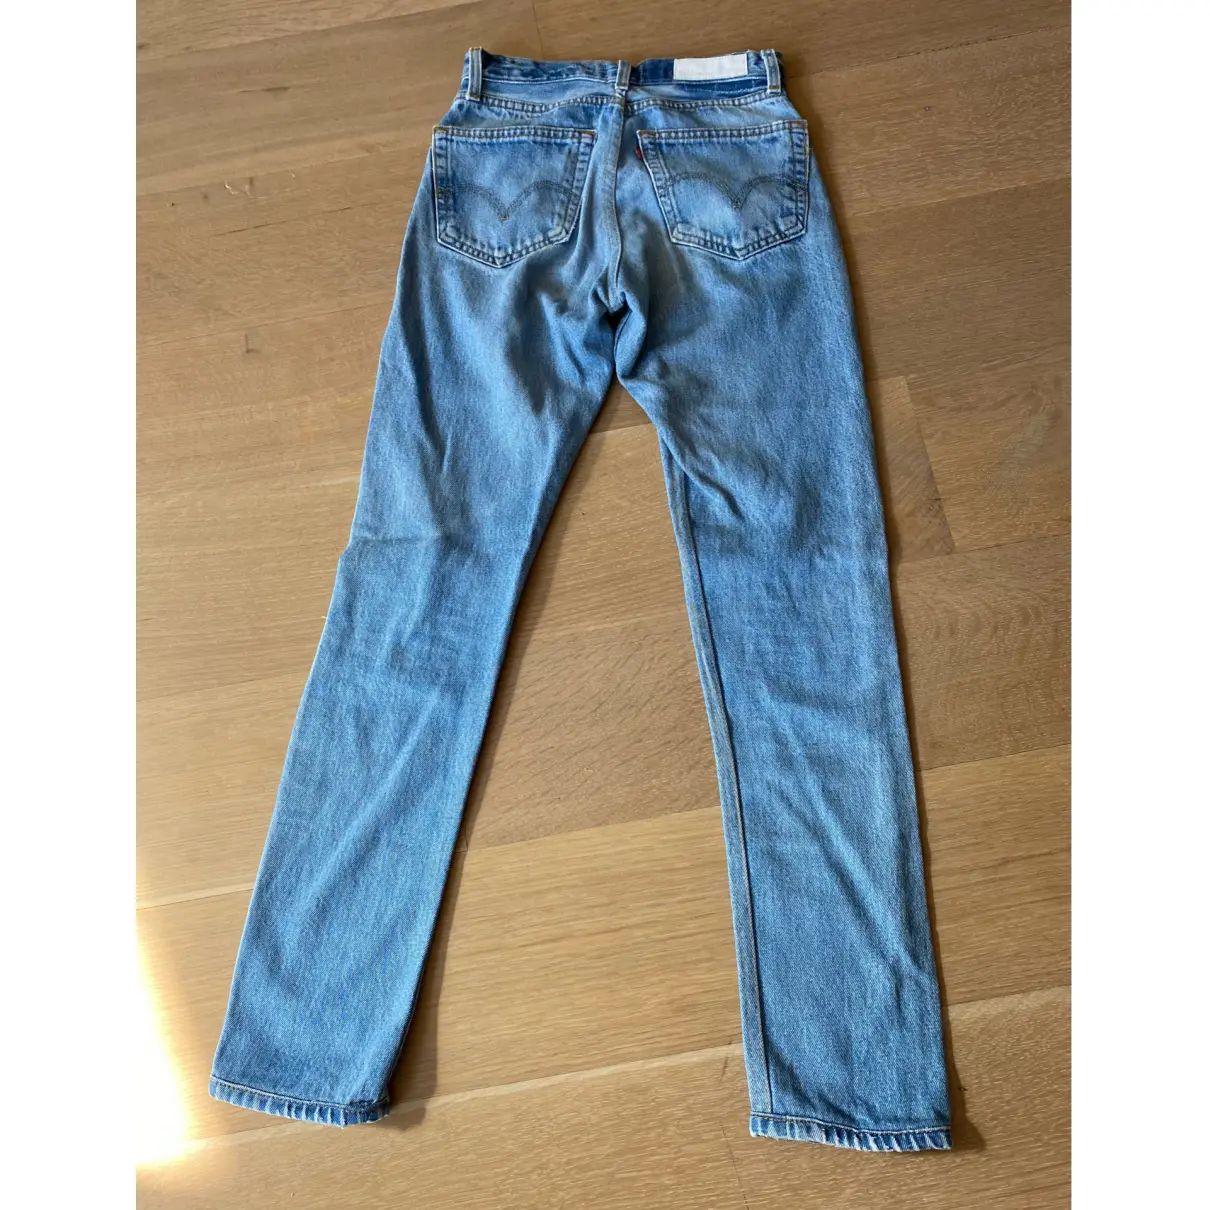 Buy Re/Done x Levi's Slim jeans online